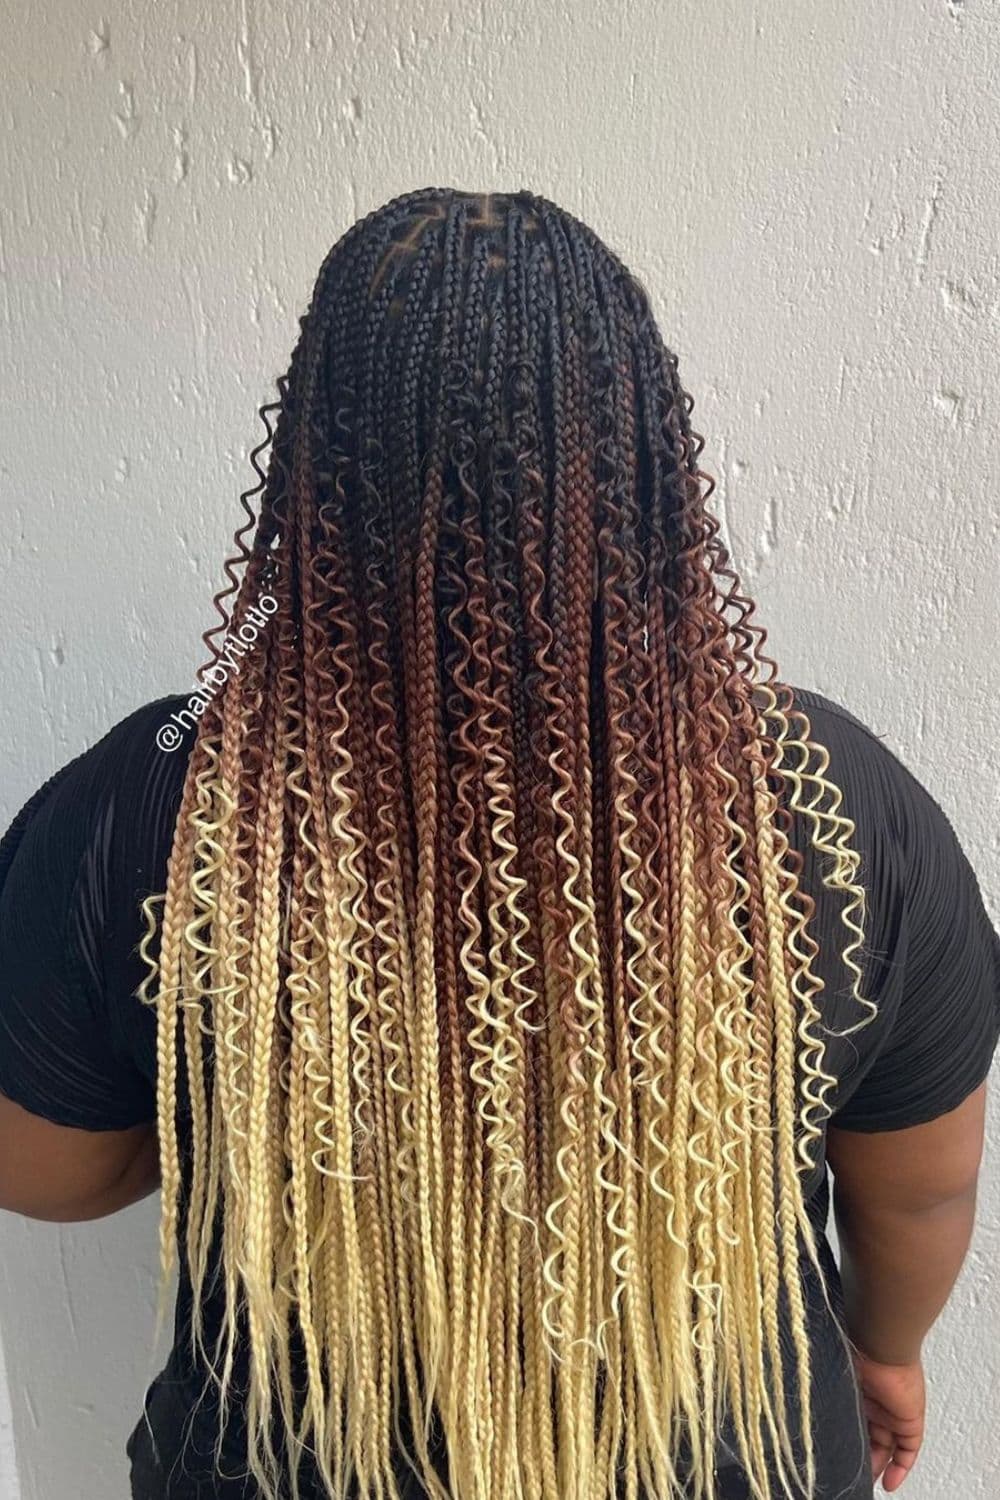 A woman with blonde ombre goddess braids.